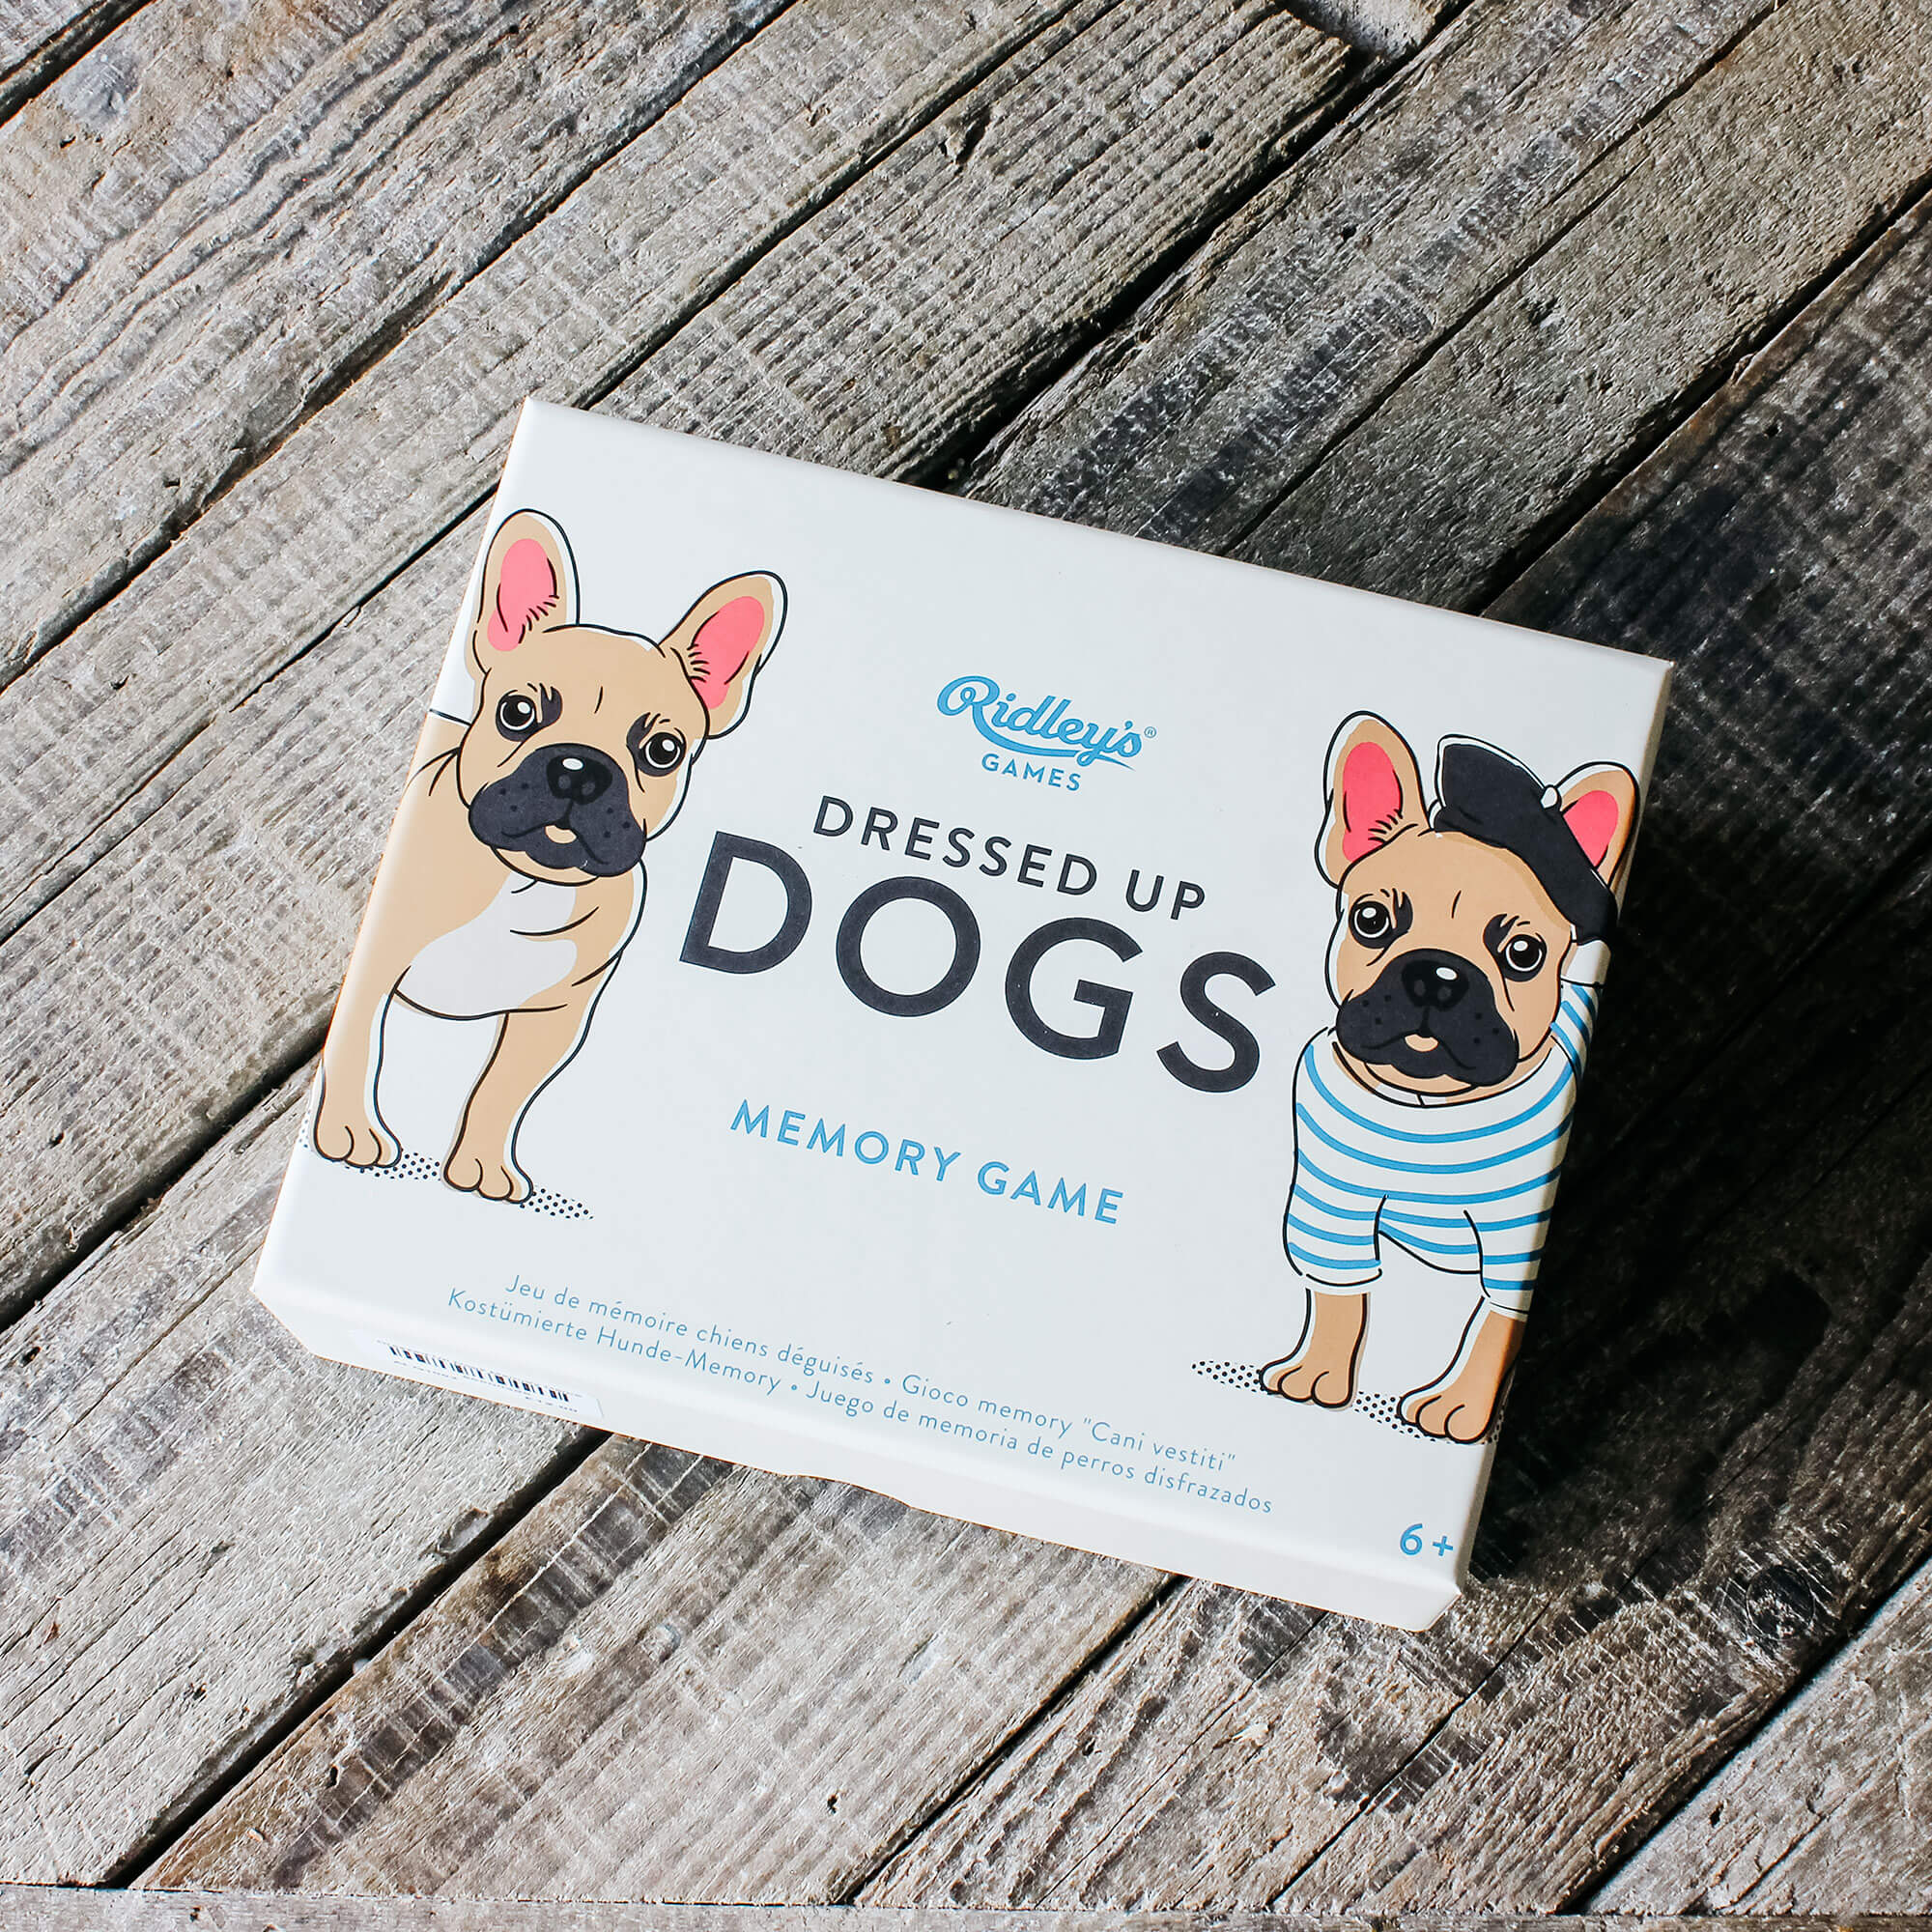 Read more about Graham and green dressed up dogs memory game